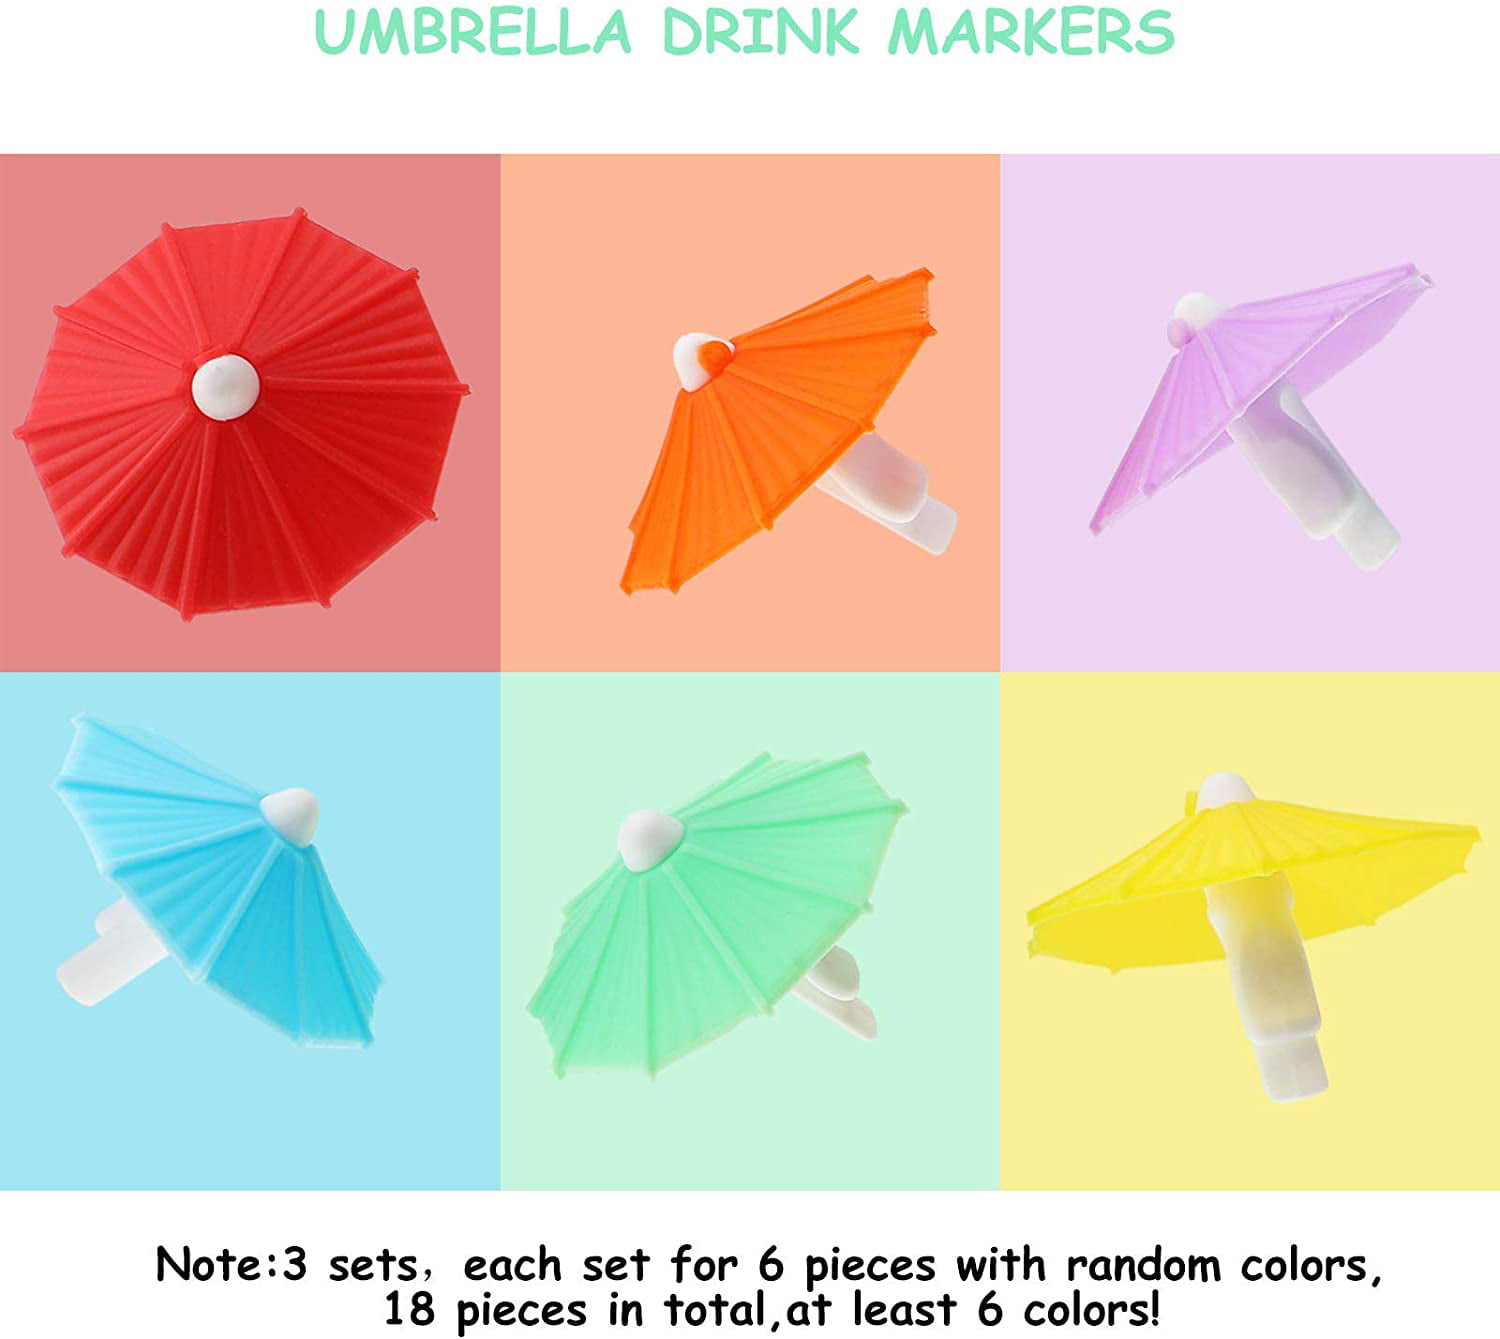 18 Pieces Umbrella Drink Markers Umbrella Wine Glass Markers Silicone Umbrella Drink Charm Umbrella Cocktail Drink Markers Multicolor Wine Drink Makers for Party Favor Bar Table Home Decoration 